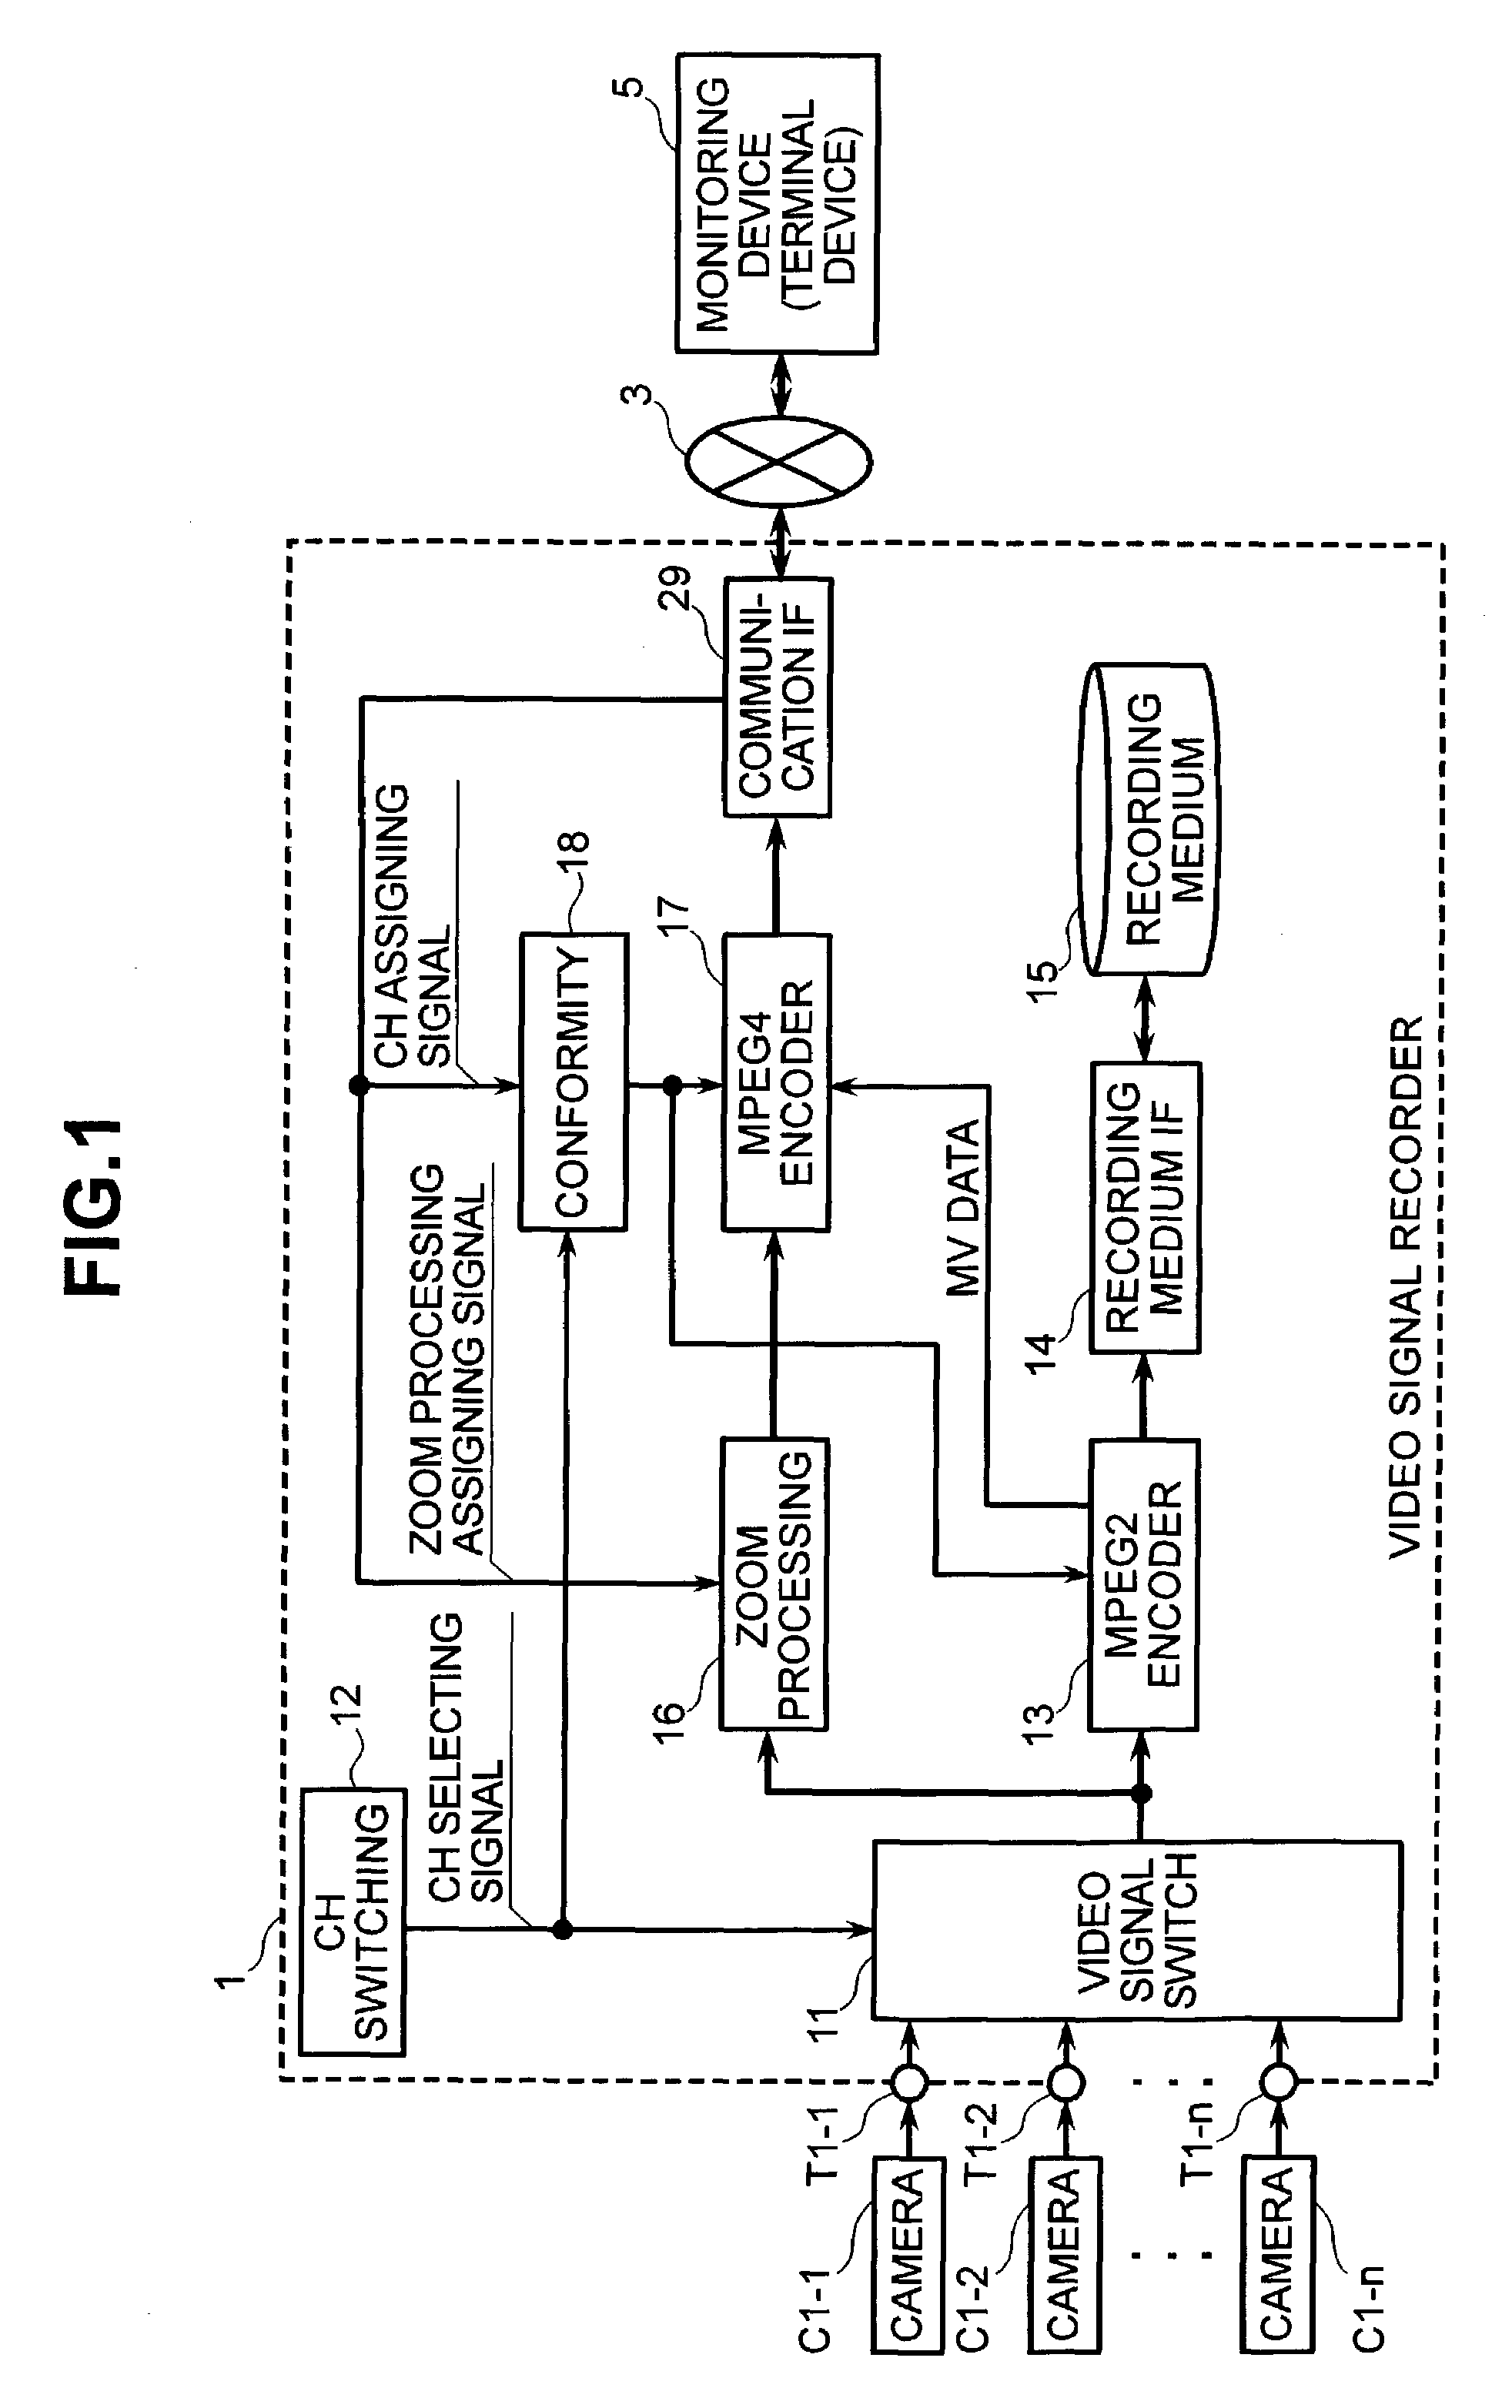 Moving picture recording and sending device having zoom processing capability